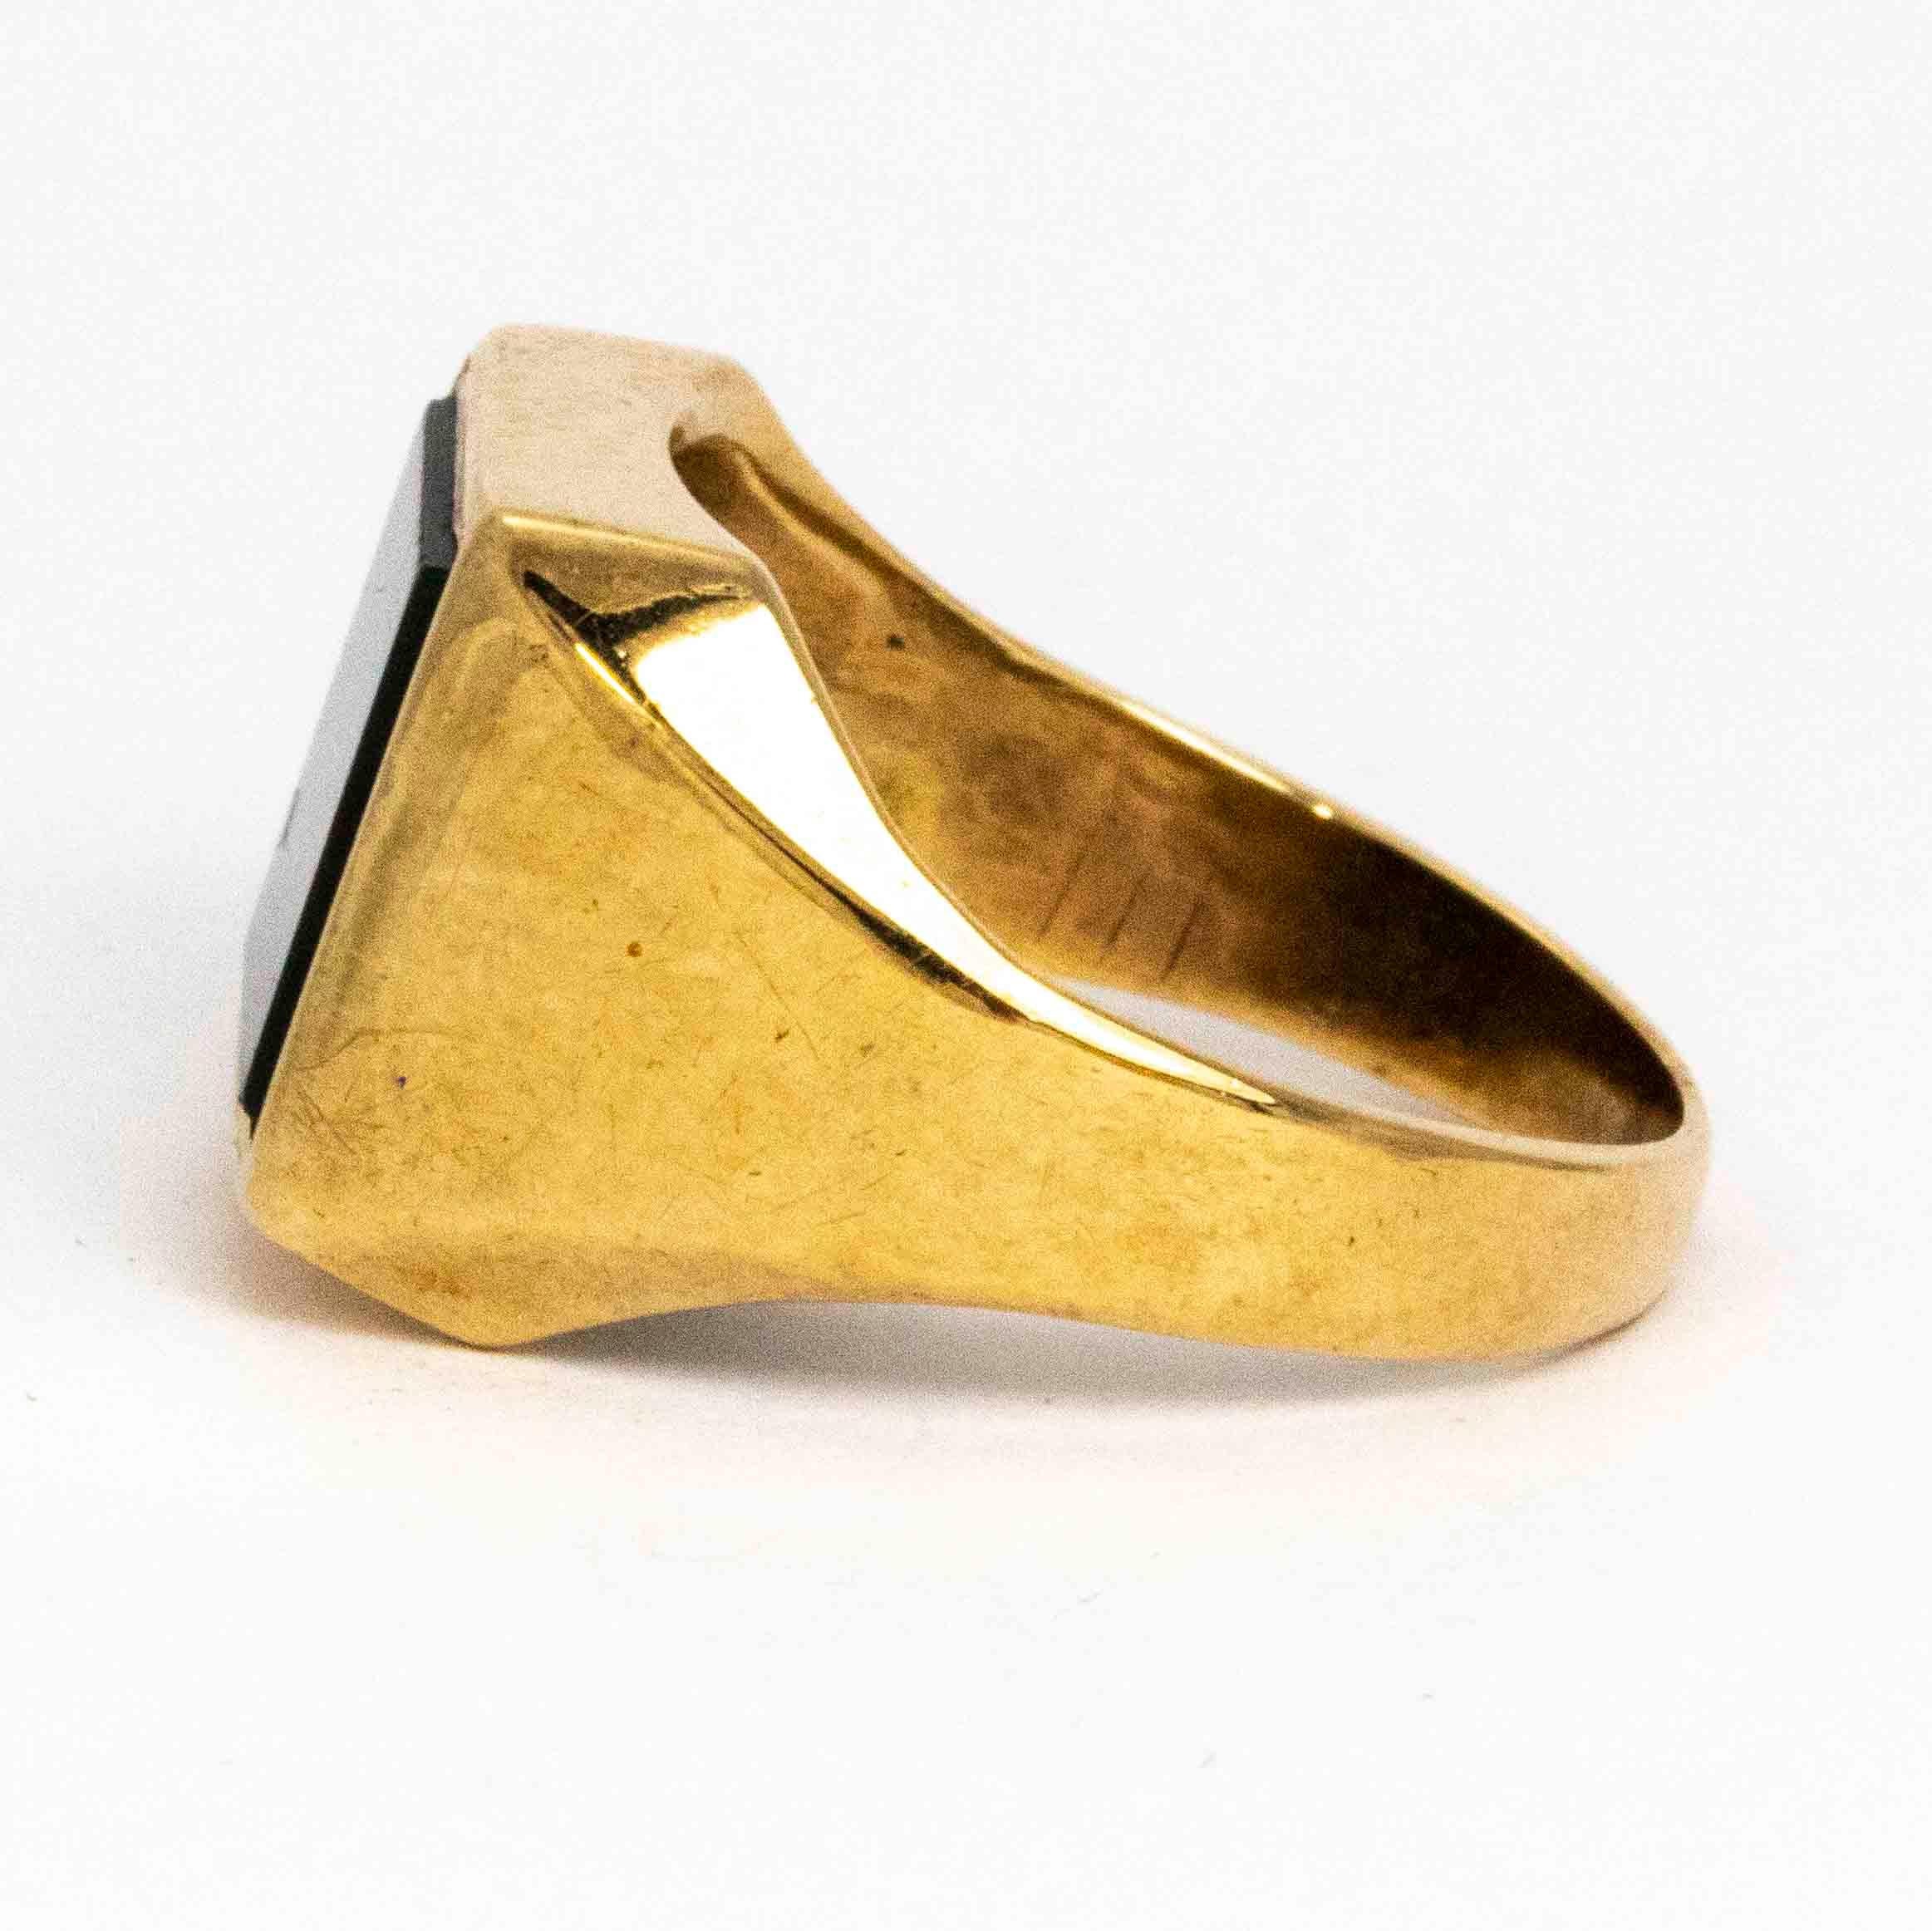 This chunky signet ring has a modern feel to it as the stone and the setting is so angular. The glossy bloodstone is set in 9ct gold. Made in Birmingham, England.

Ring Size: Q or 8 
Stone Dimensions: 10mm x 10mm 

